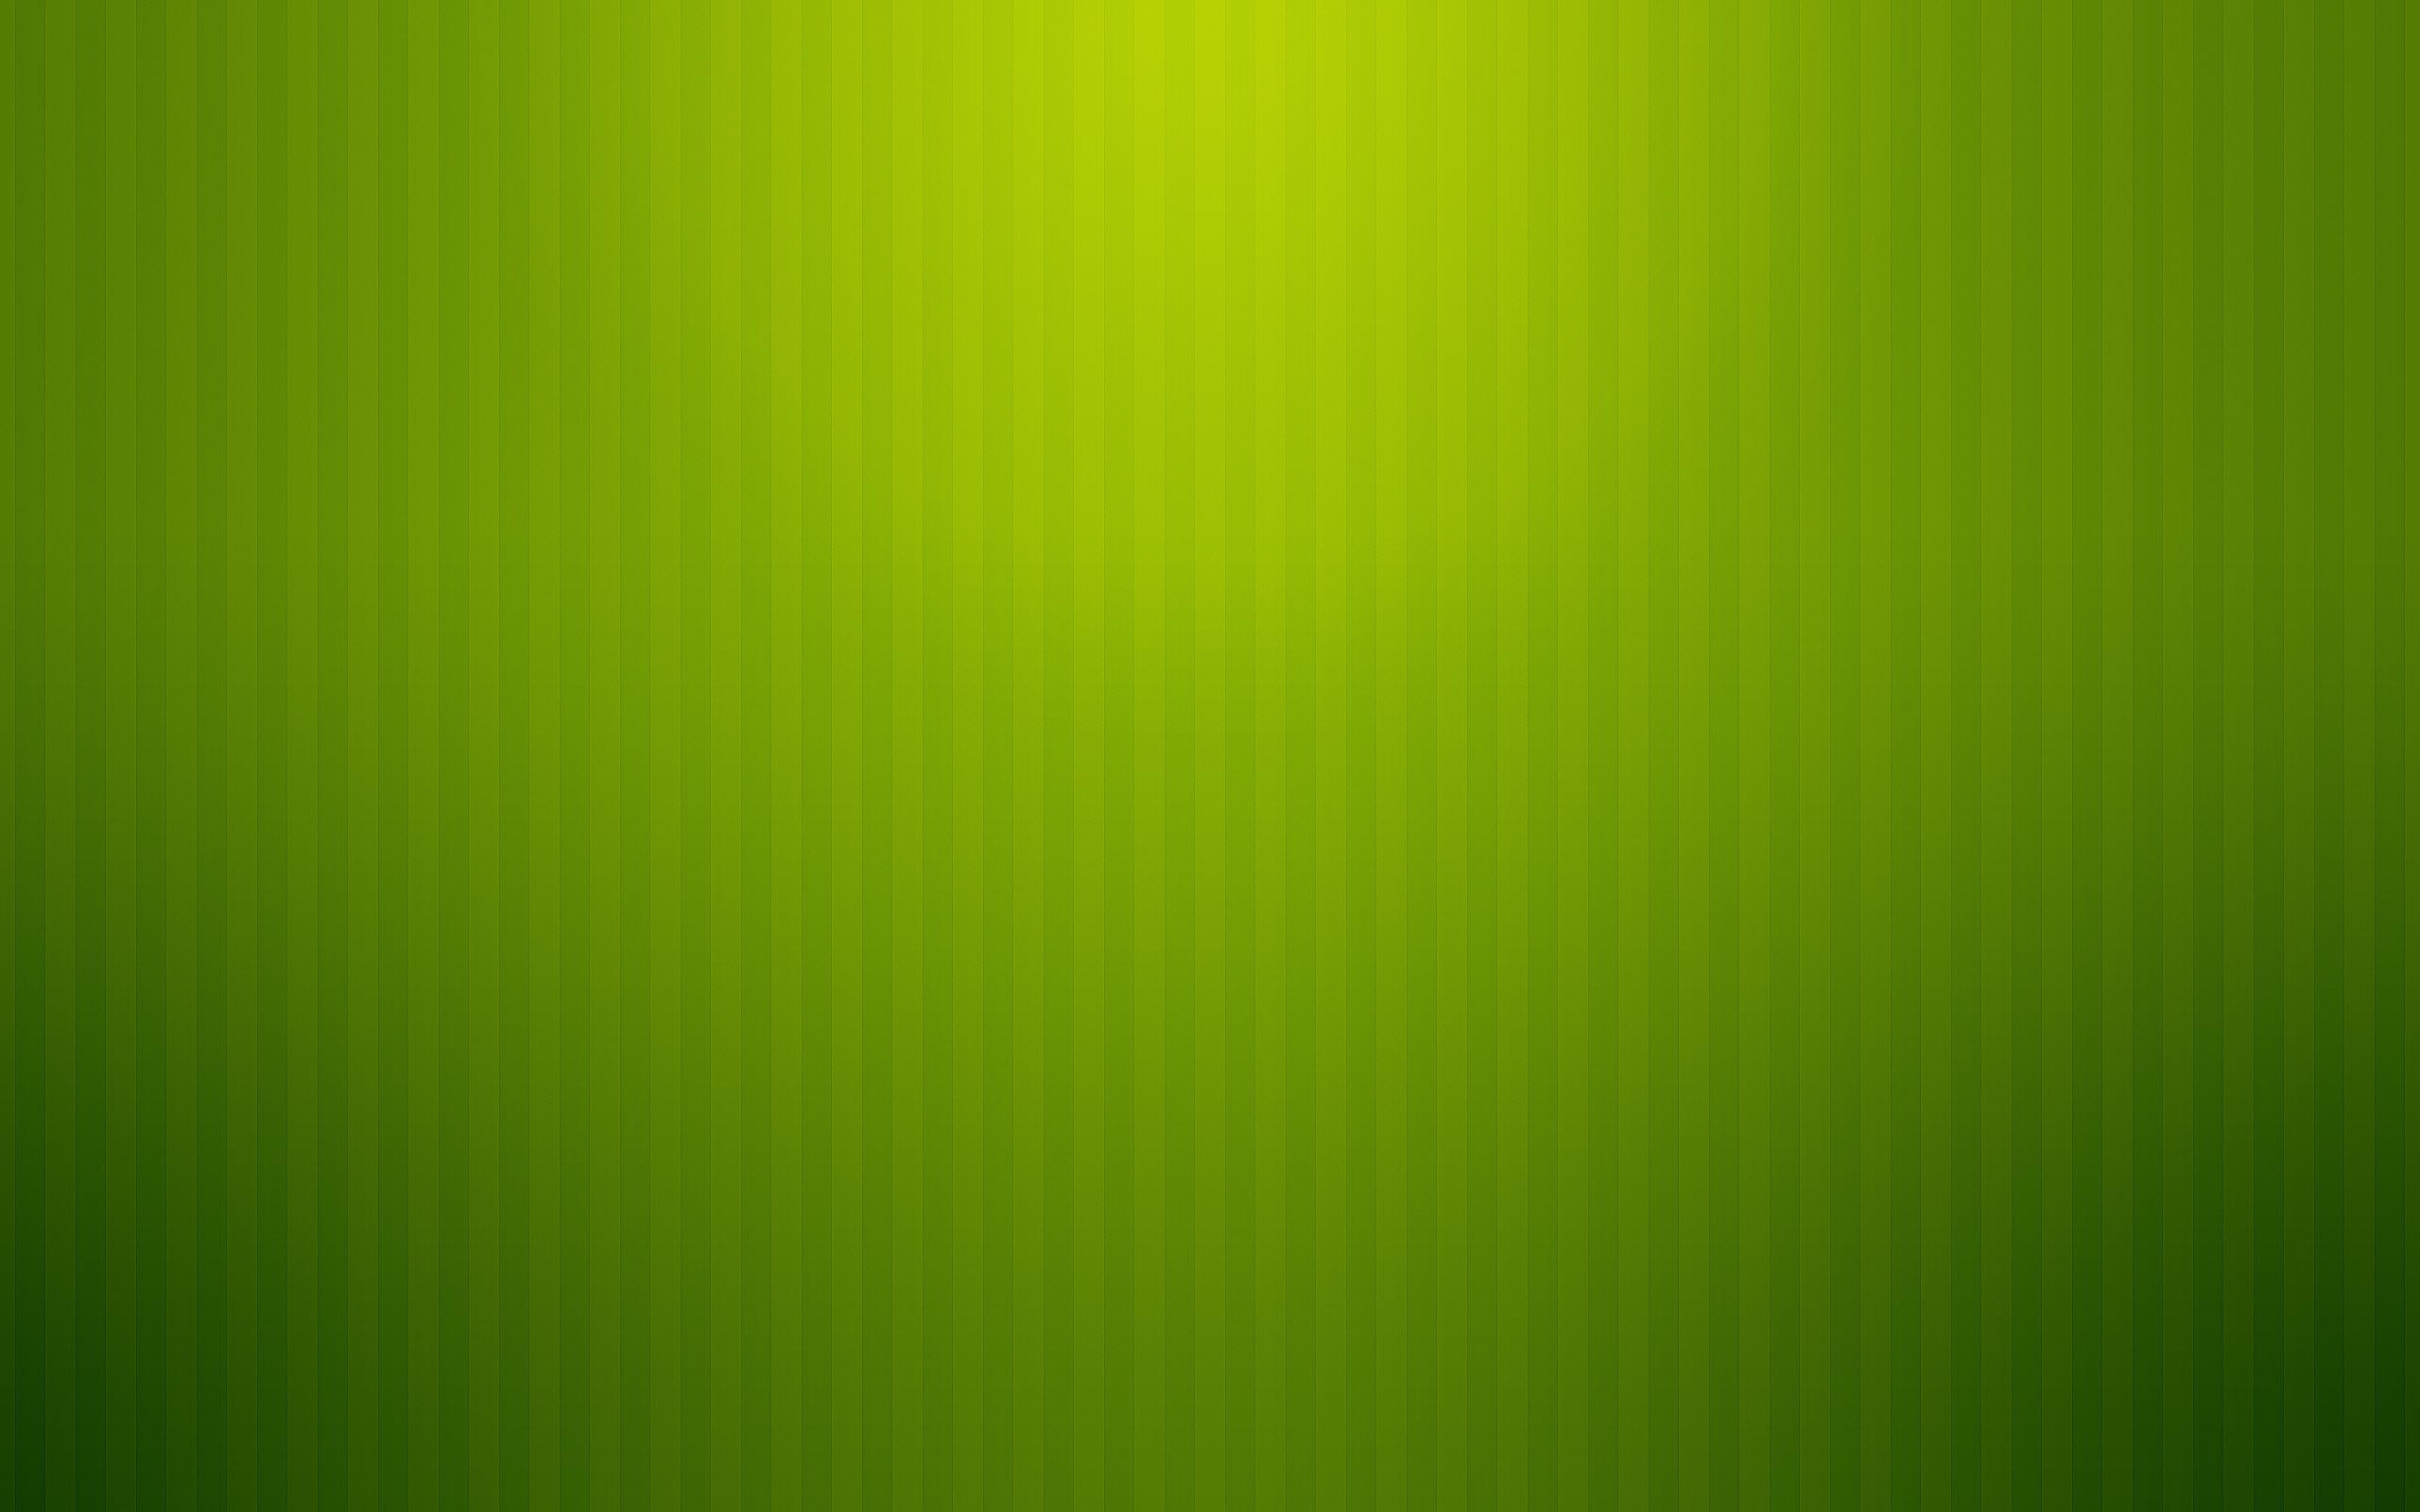 2560x1600 green light plain line background hd wallpapers cool images tablet smart  phones colourful desktop wallpapers mac desktop images samsung phone  wallpapers ...